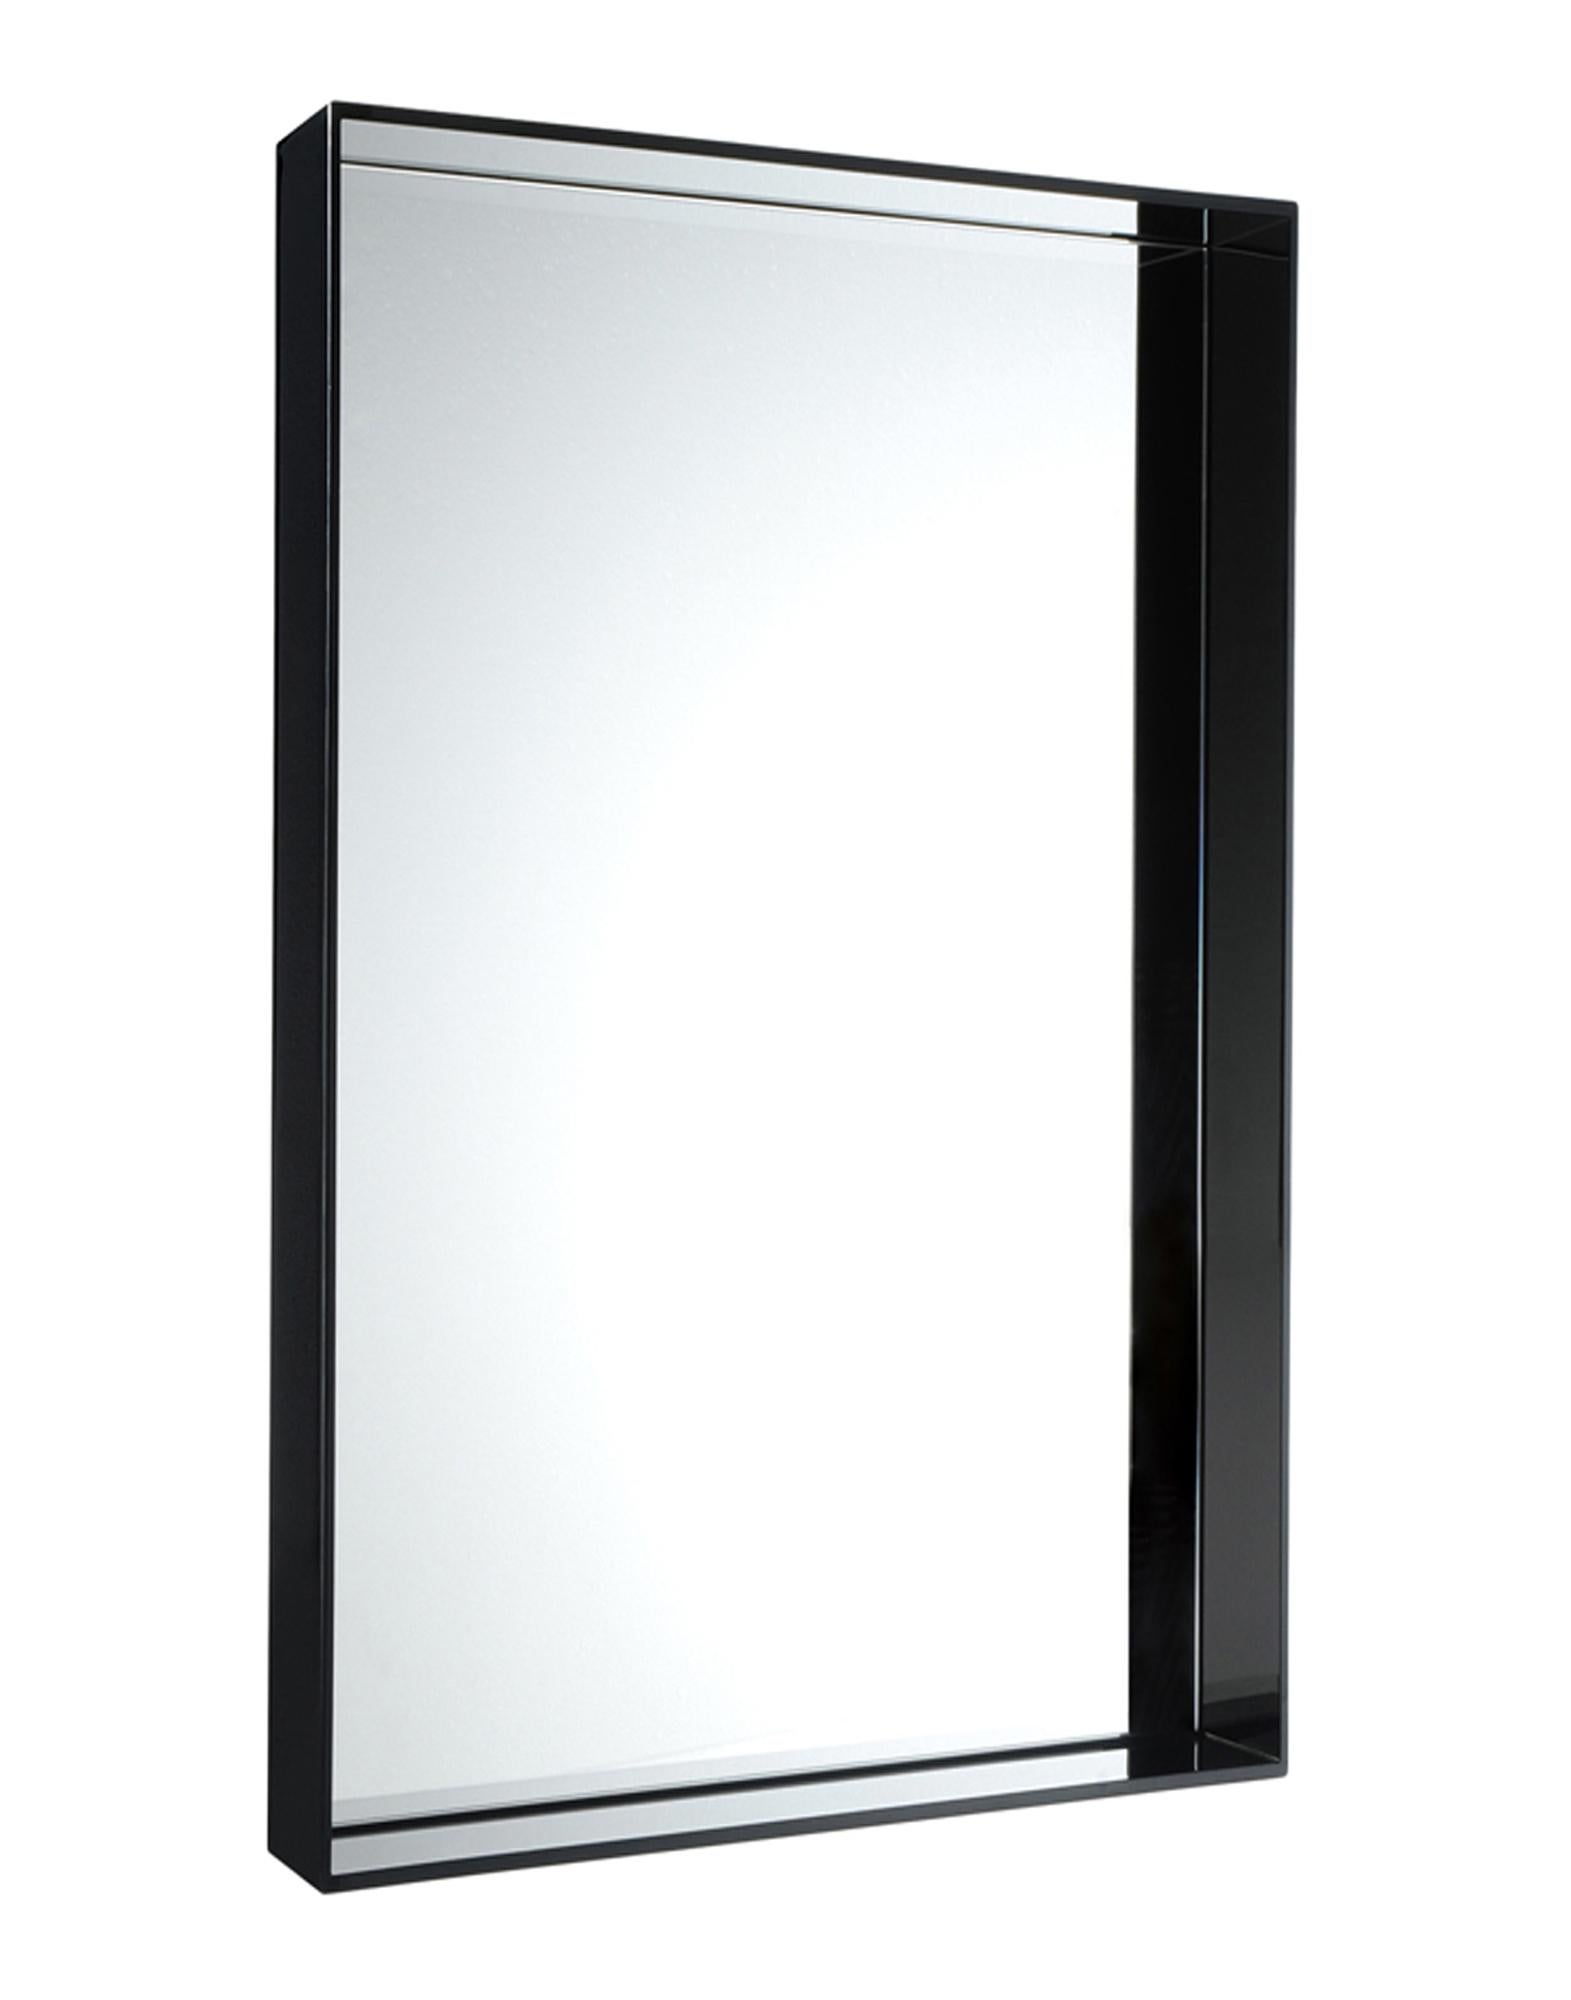 Only Me is a mirror with a slender frame in a variety of colors. Only Me is available in square and rectangular versions that can be hung in either direction.
 